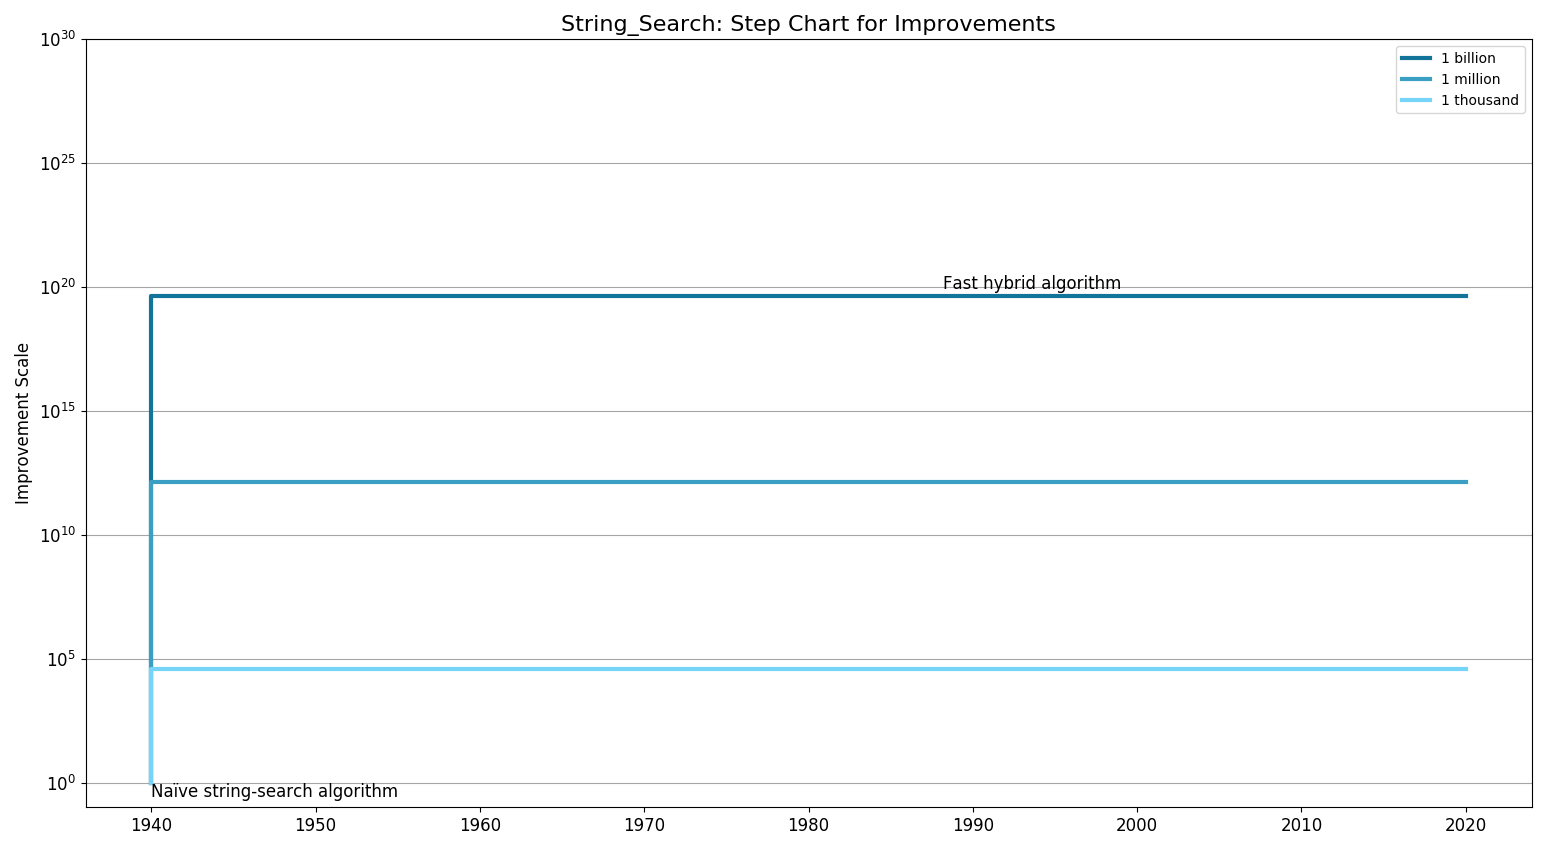 String SearchStepChart.png